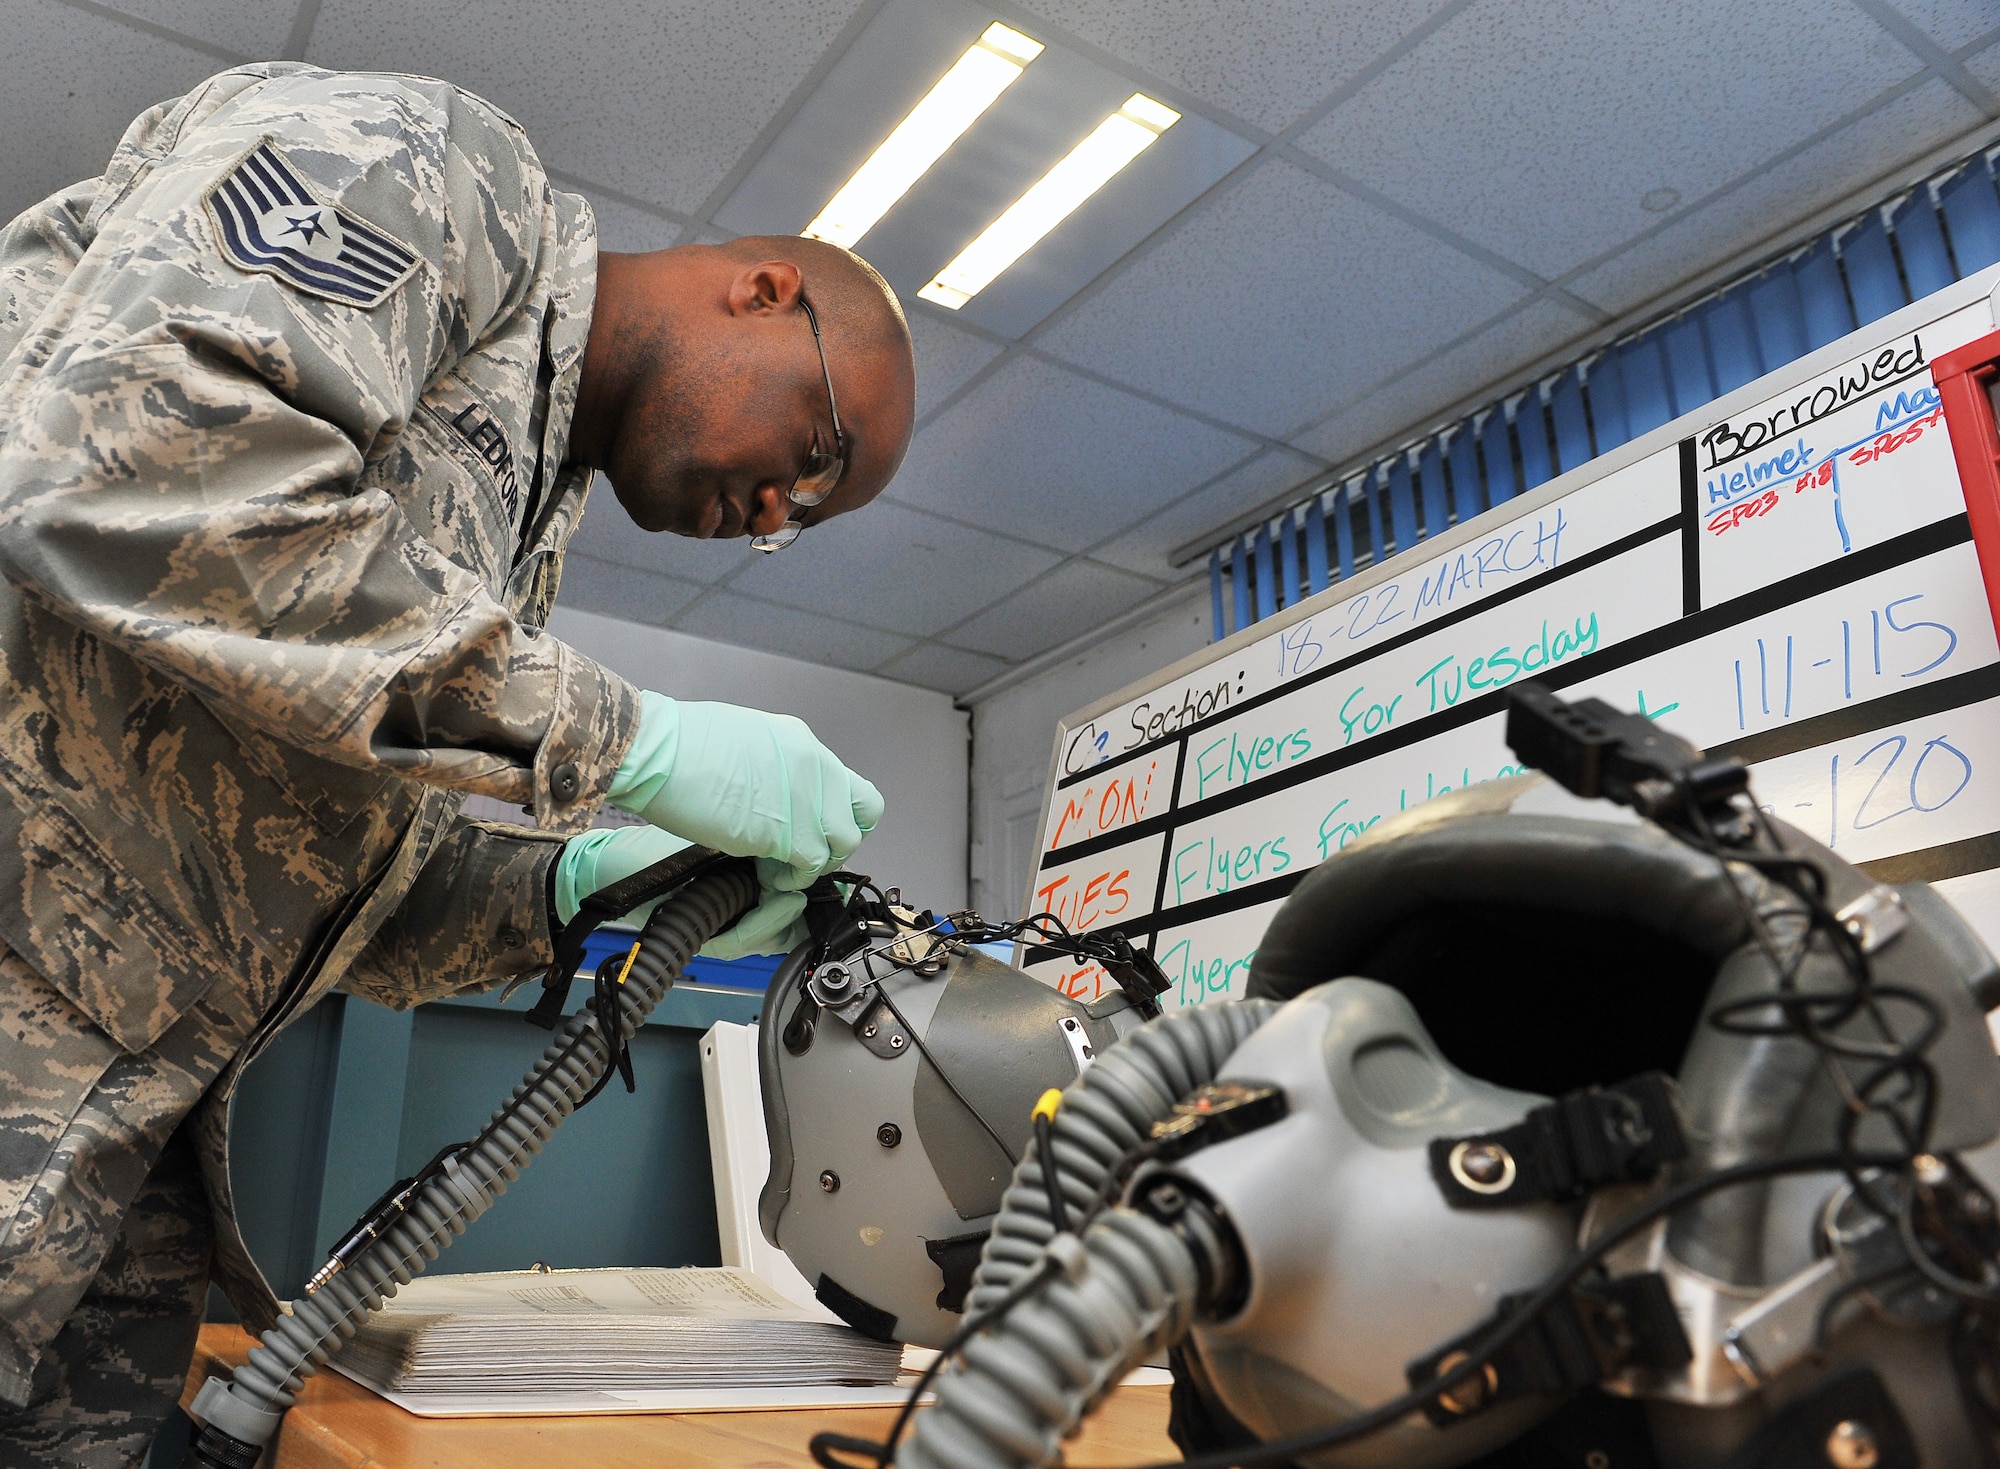 Tech. Sgt. Timothy Ledford, 86th Operations Support Squadron aircrew flight equipment craftsman, checks for defects on an oxygen masks, March 20, 2013, Ramstein Air Base, Germany. Ledford was honored with the aircrew flight equipment NCO of the year award for his outstanding accomplishments. (U.S. Air Force photo/Airman 1st Class Dymekre Allen)